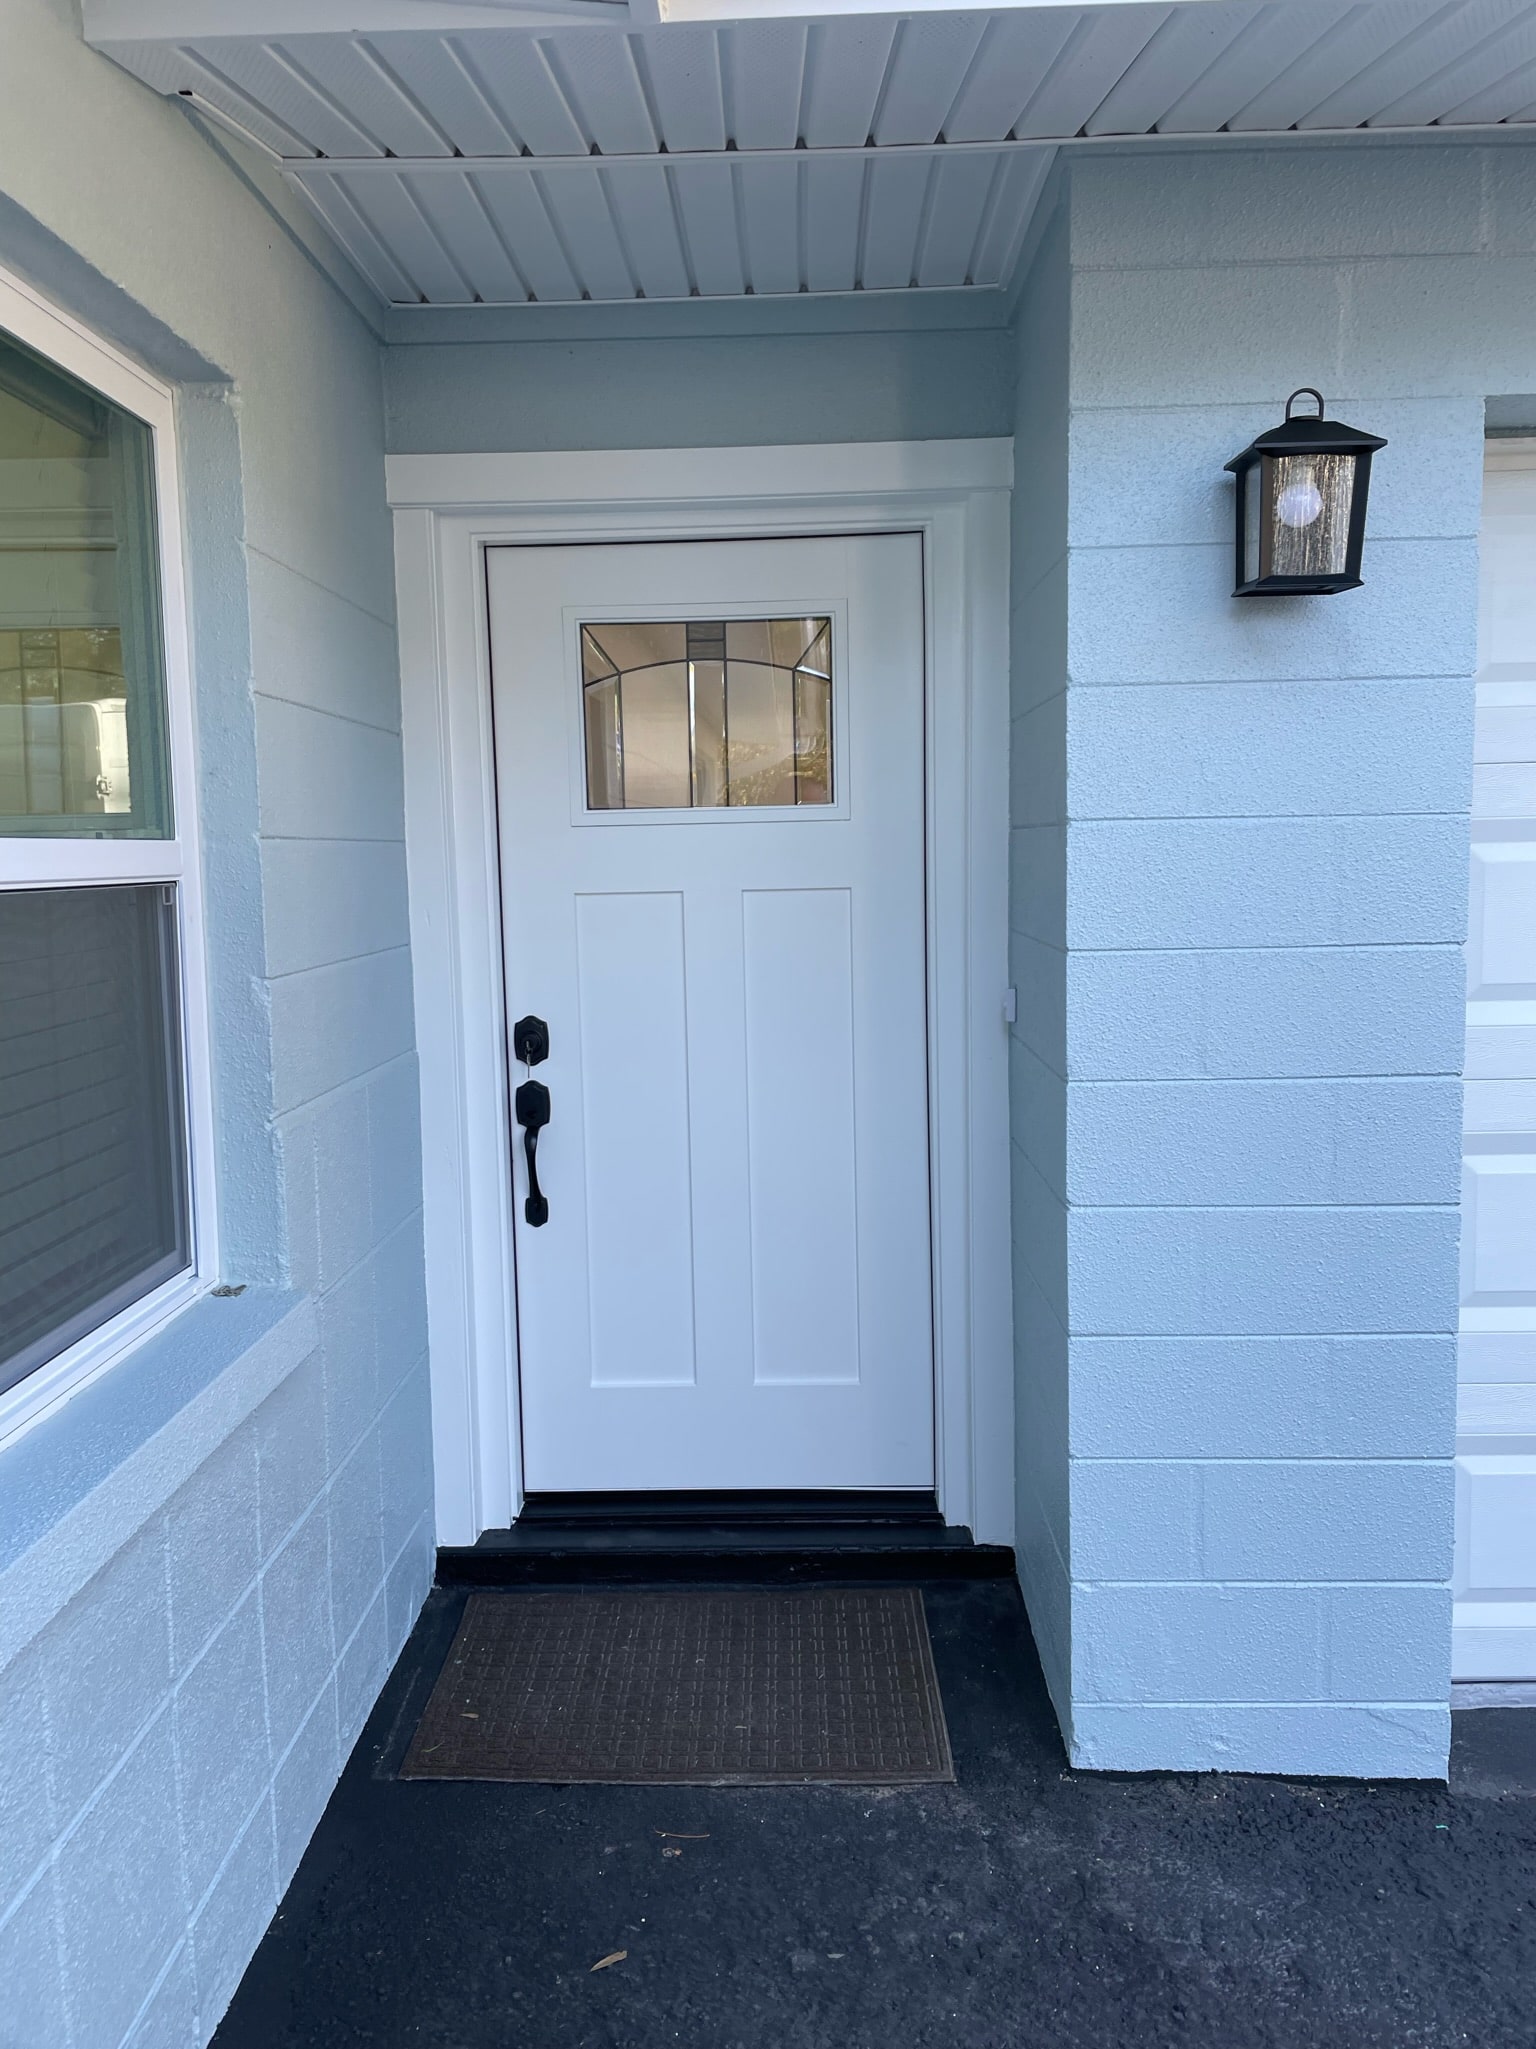 Re-painted door with light blue exterior